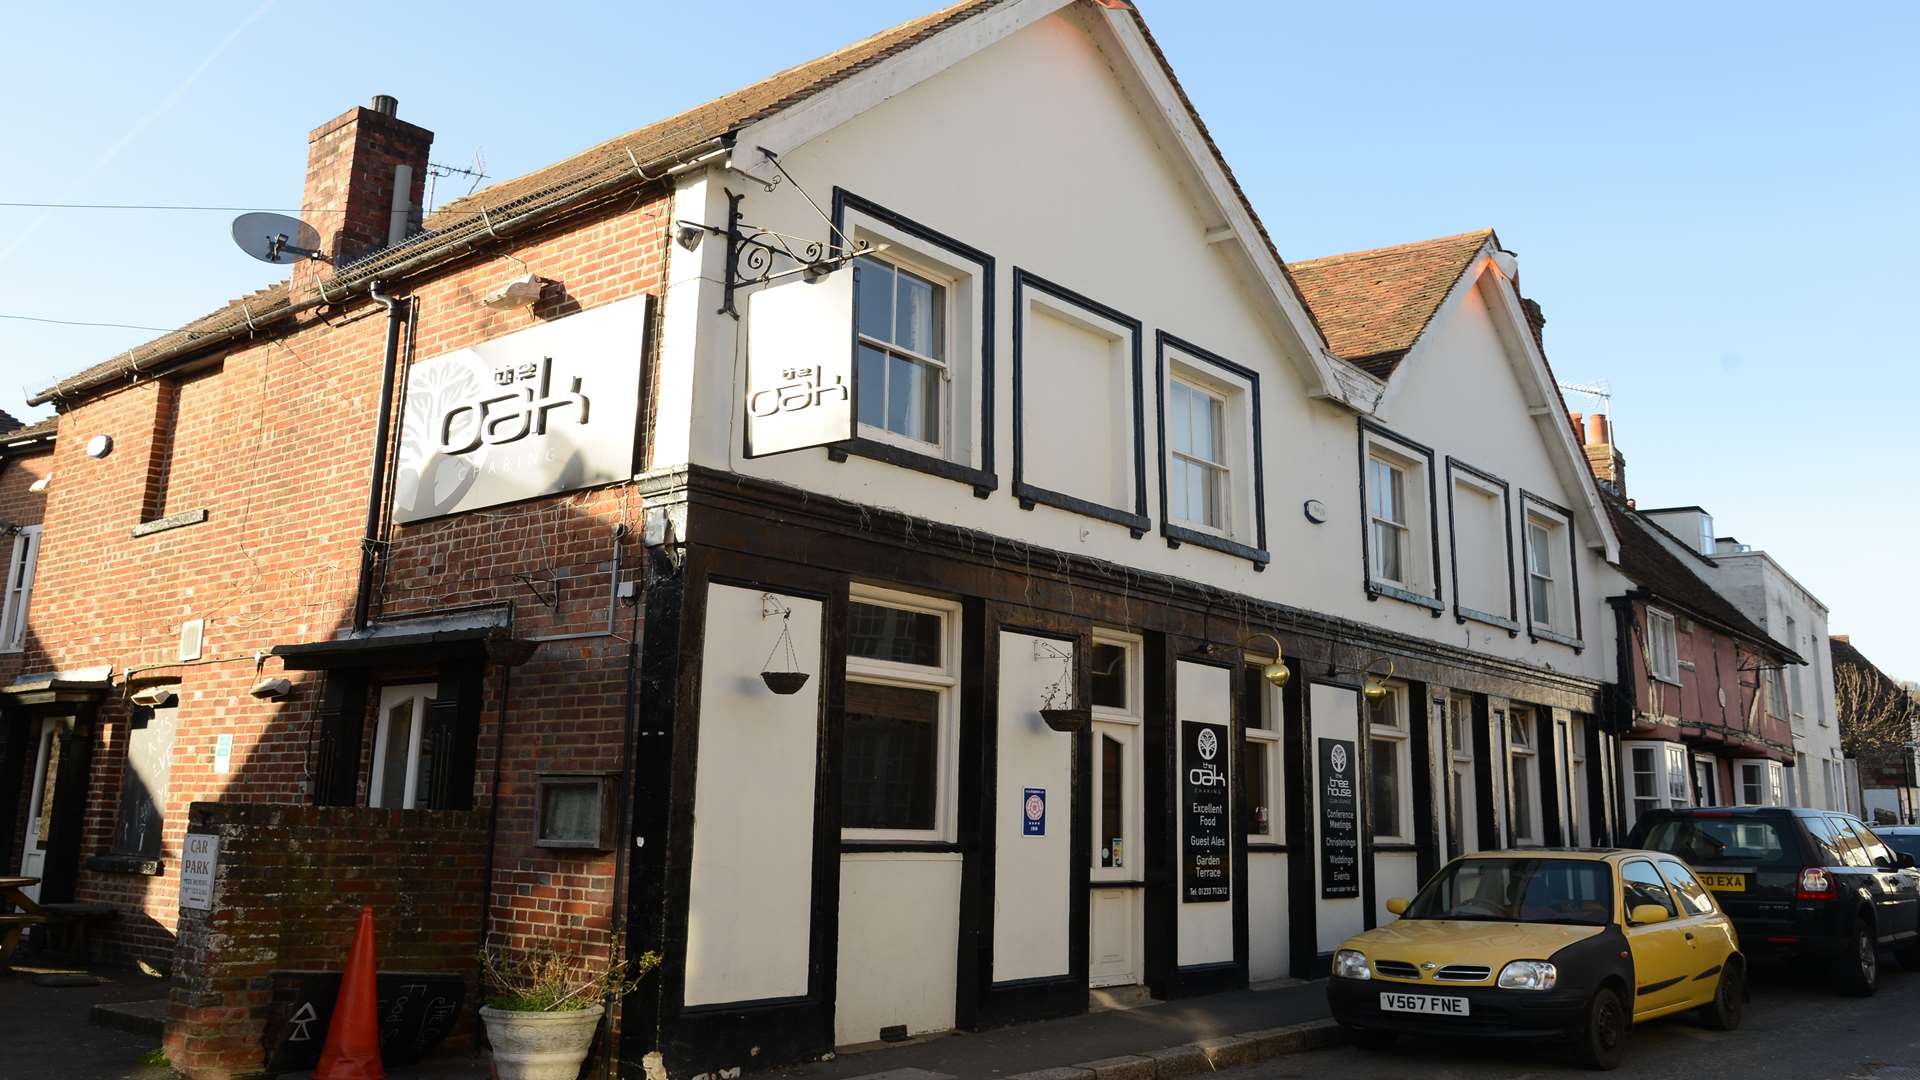 The Royal Oak (previously The Oak) has been closed for two years